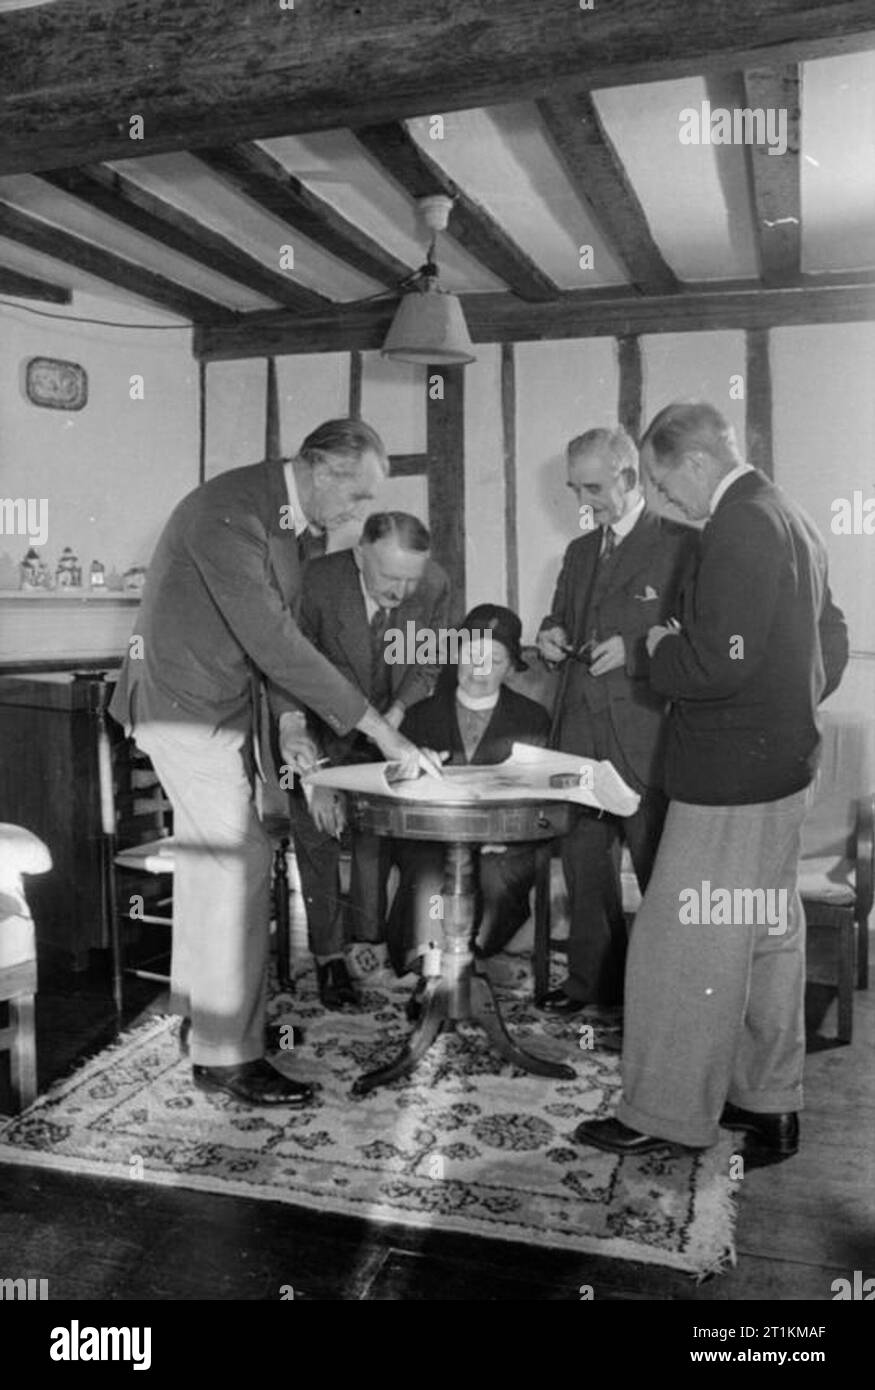 Invasion Village- Everyday Life in Orford, Suffolk, England, 1941 Members of the village Invasion Committee study the village's shelter system in the home of one of the committee members, 1941. Left to right they are: MP Walter Ross Taylor, County Councillor Arkle, Nurse Baker, Parish Council Chairman Chapman and Food Organiser Sir Henry Bunbury. Stock Photo